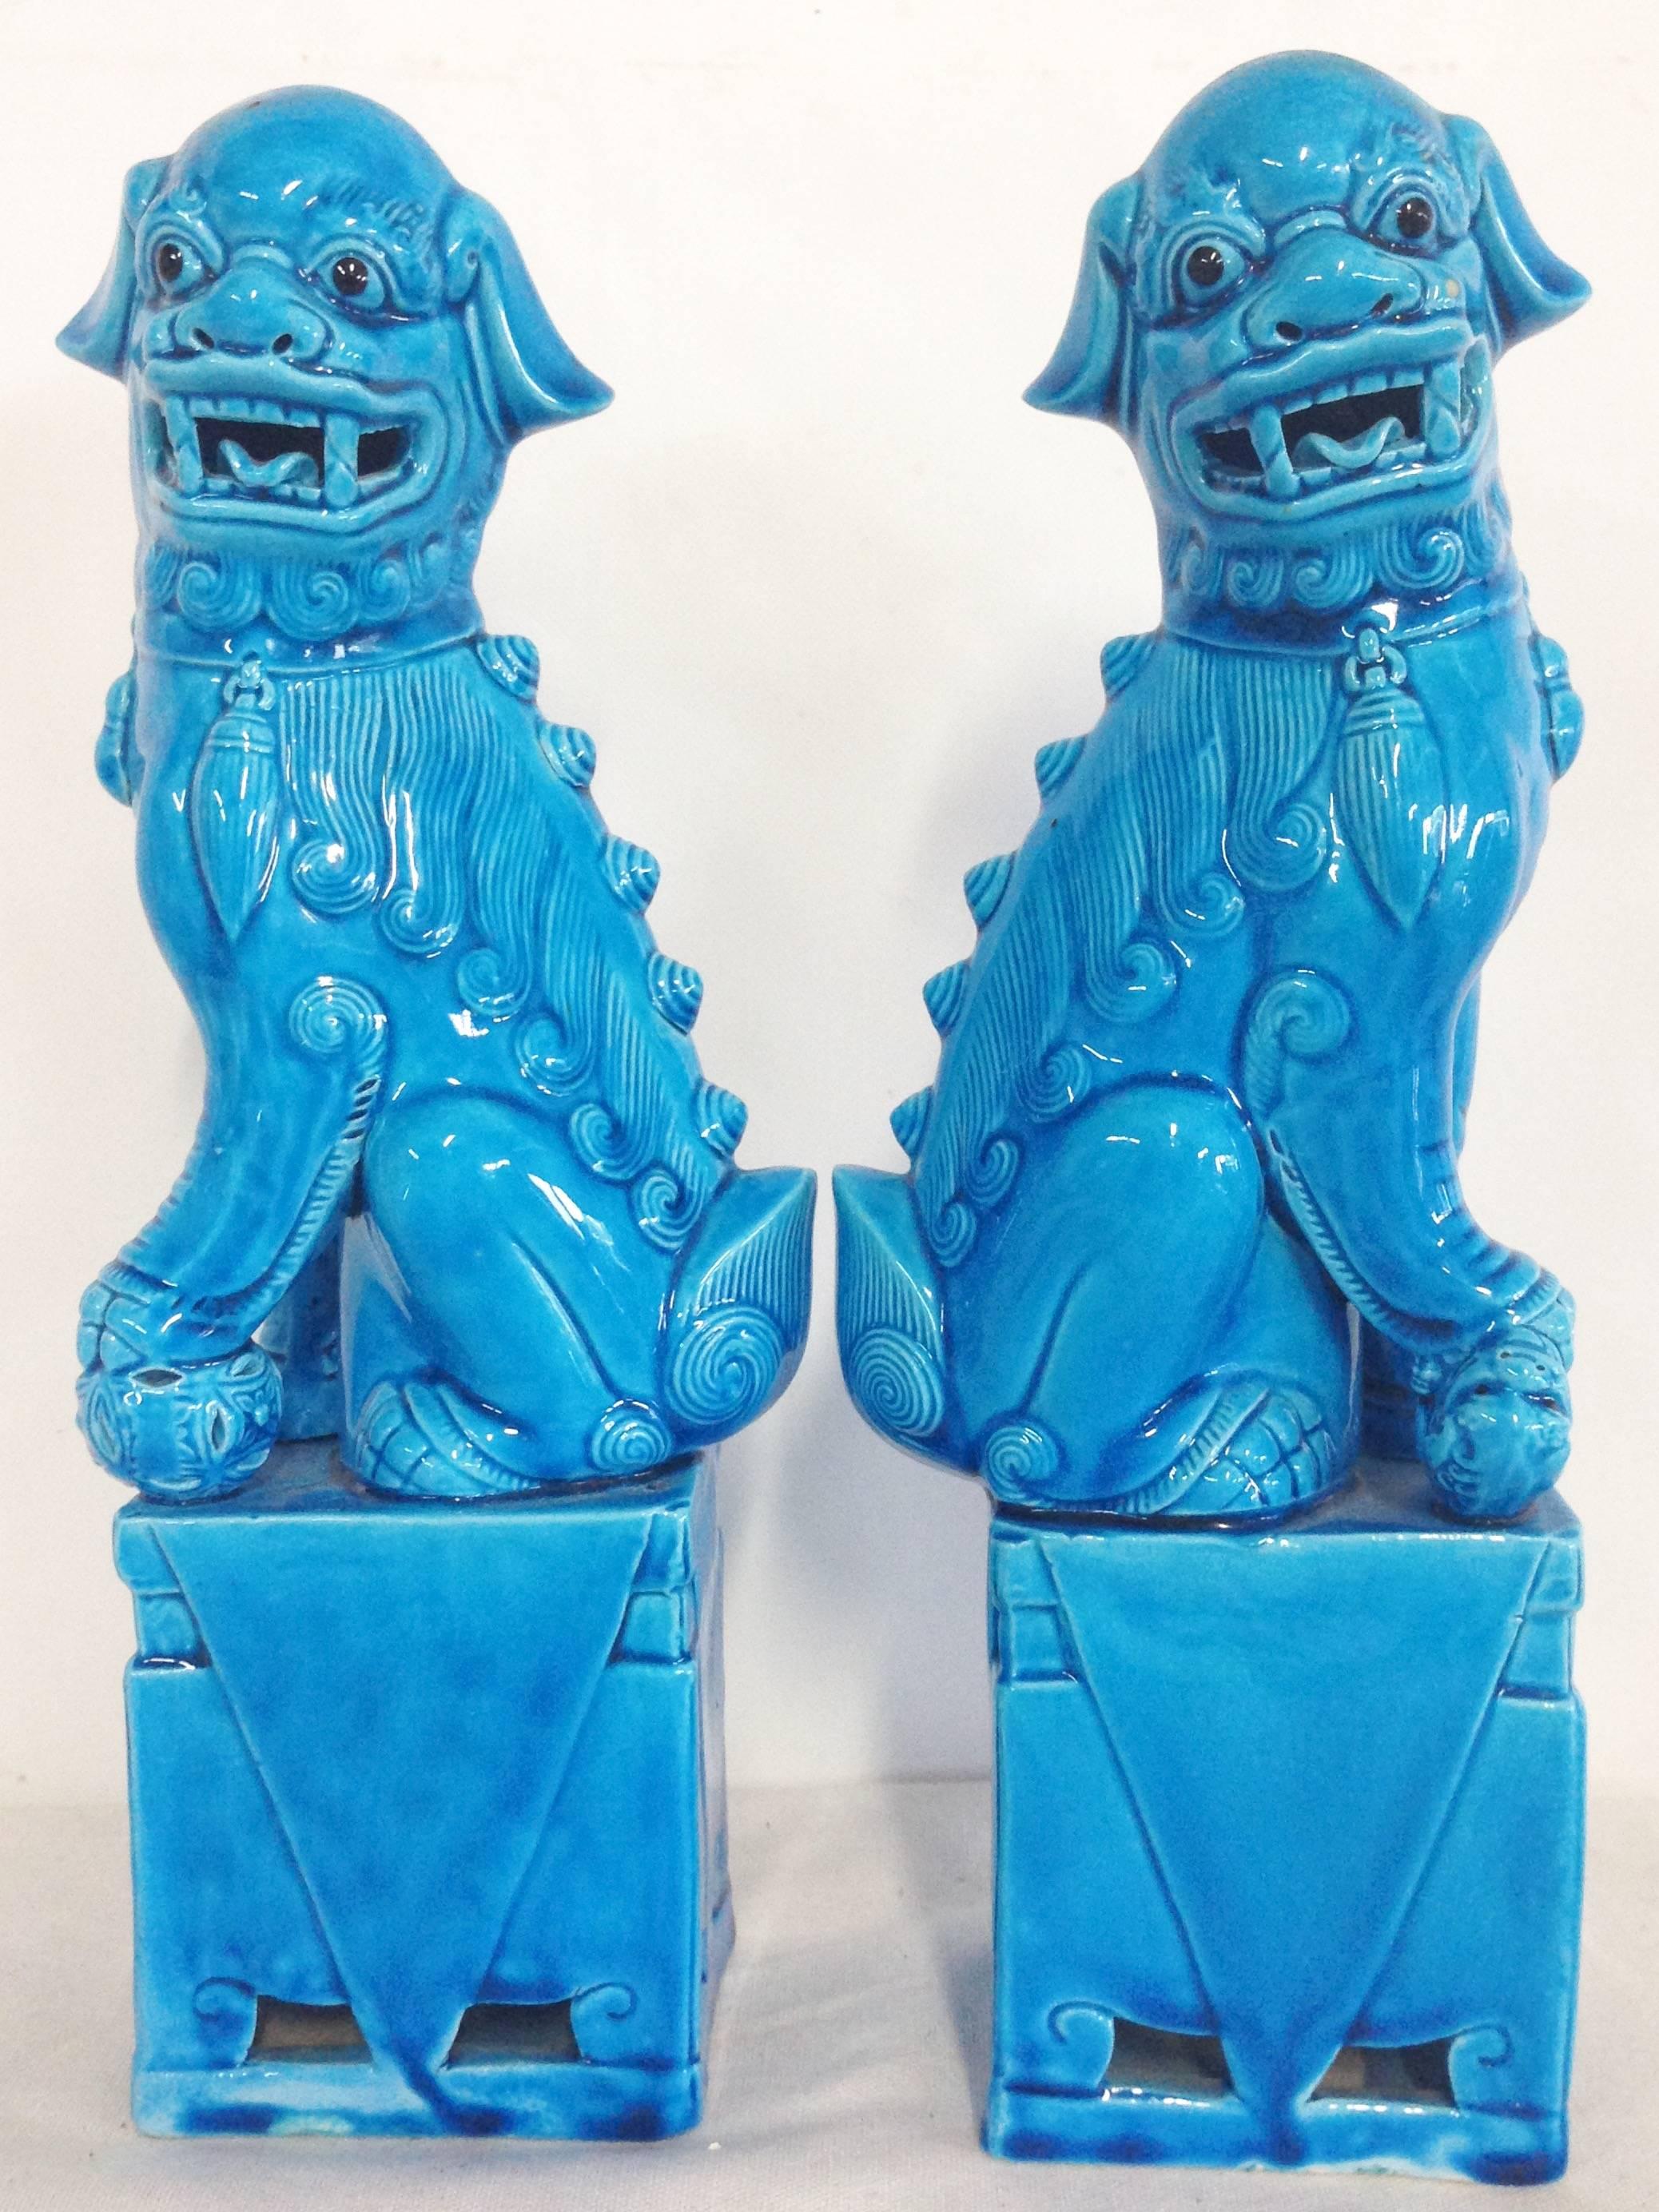 1950s ceramic turquoise Chinese export foo dog pair. Signed imprint on underside, EA3. Amazing detail, black eyes and tall at 12